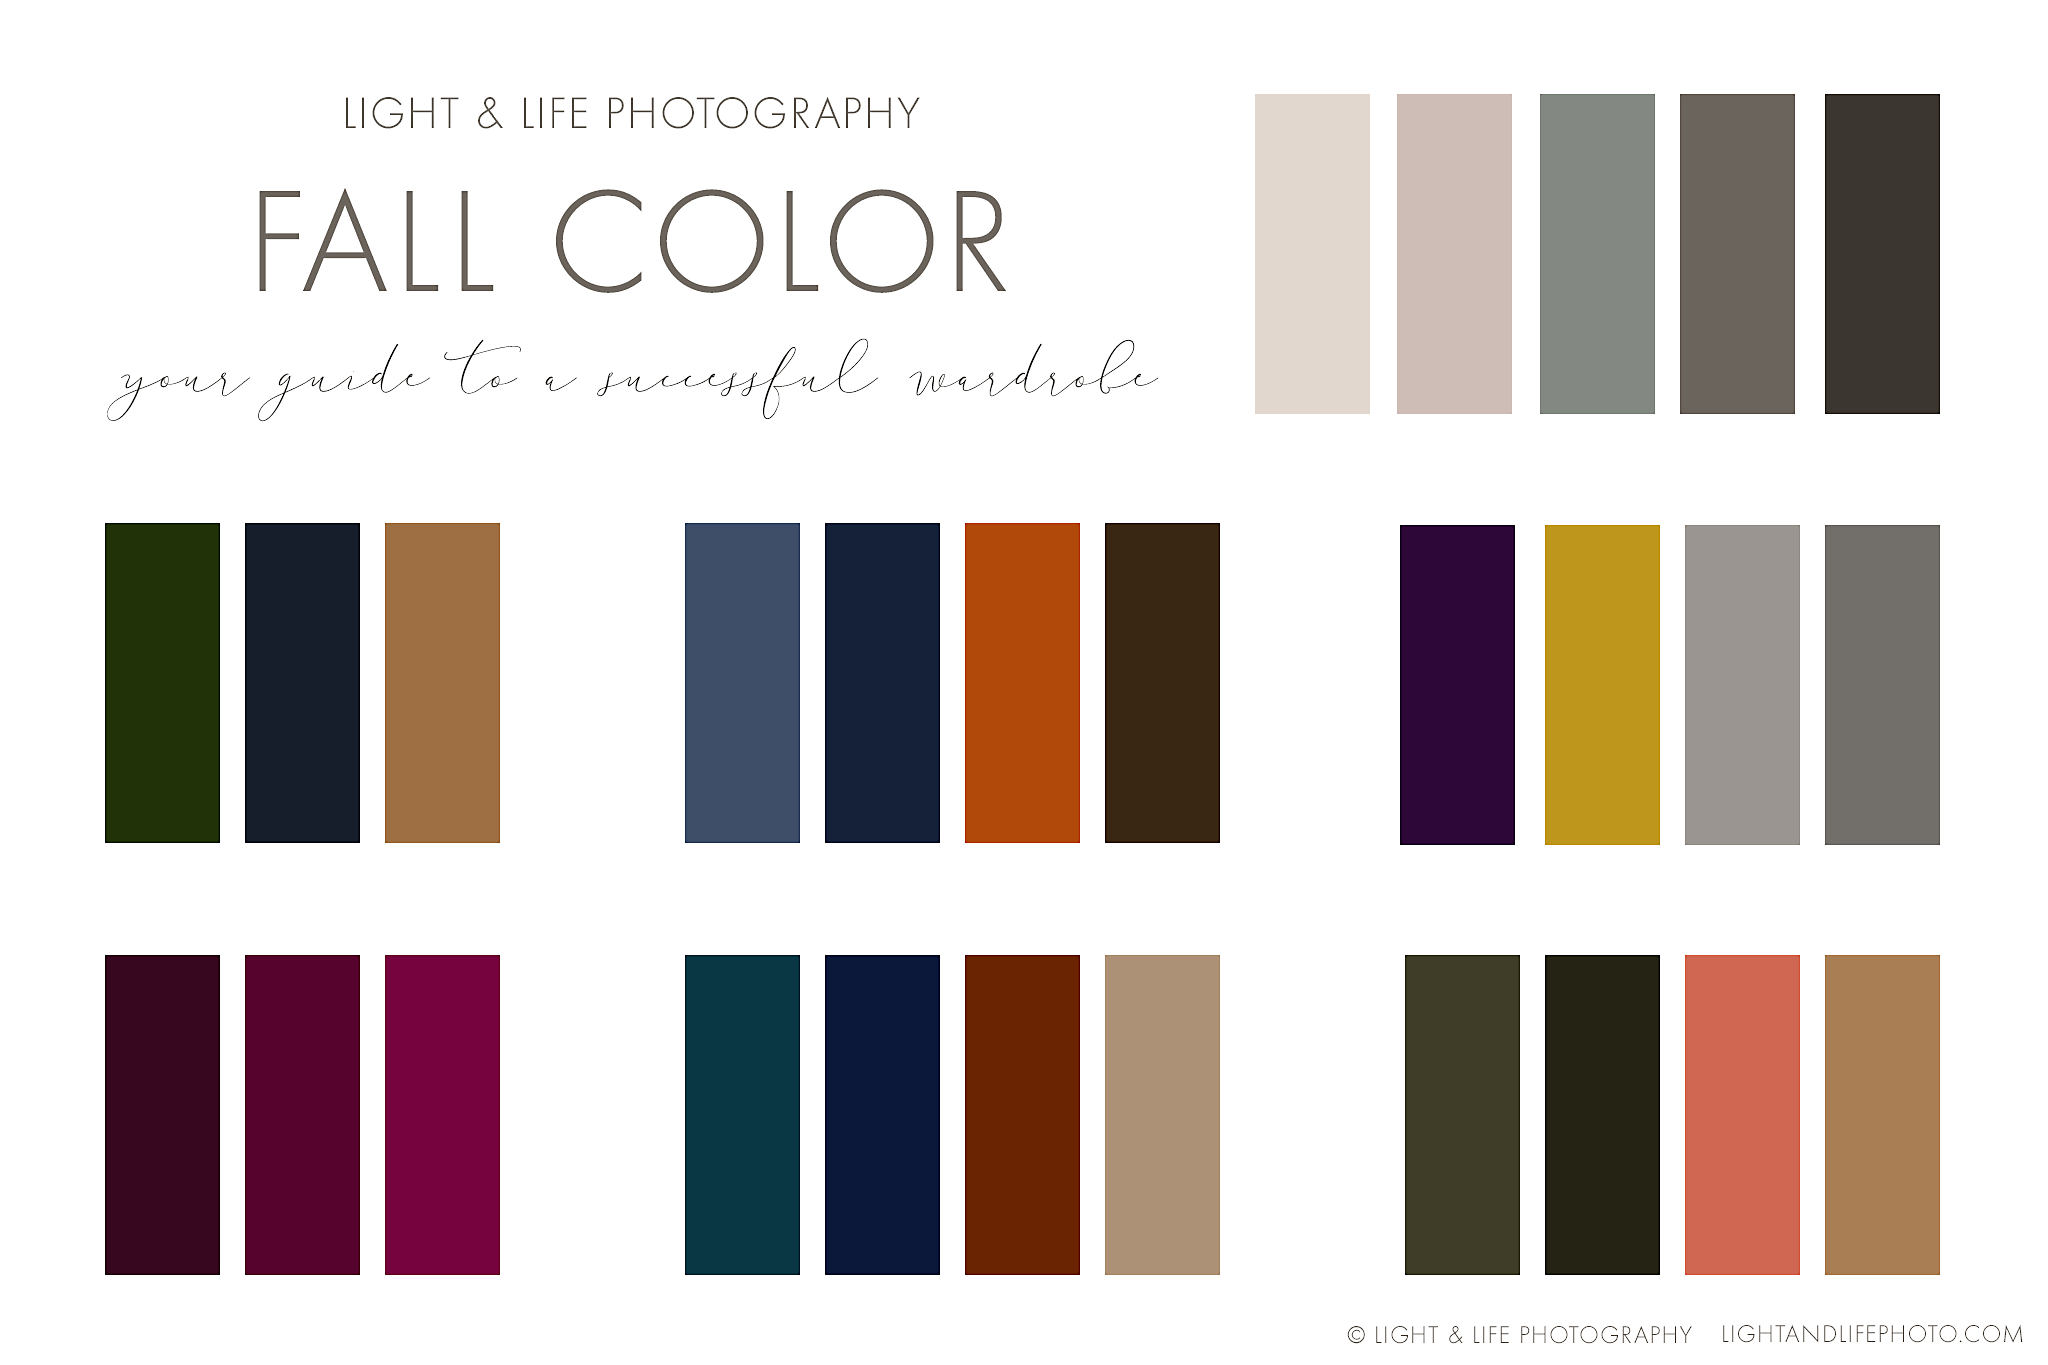 Fall wardrobe color client guide for family photos